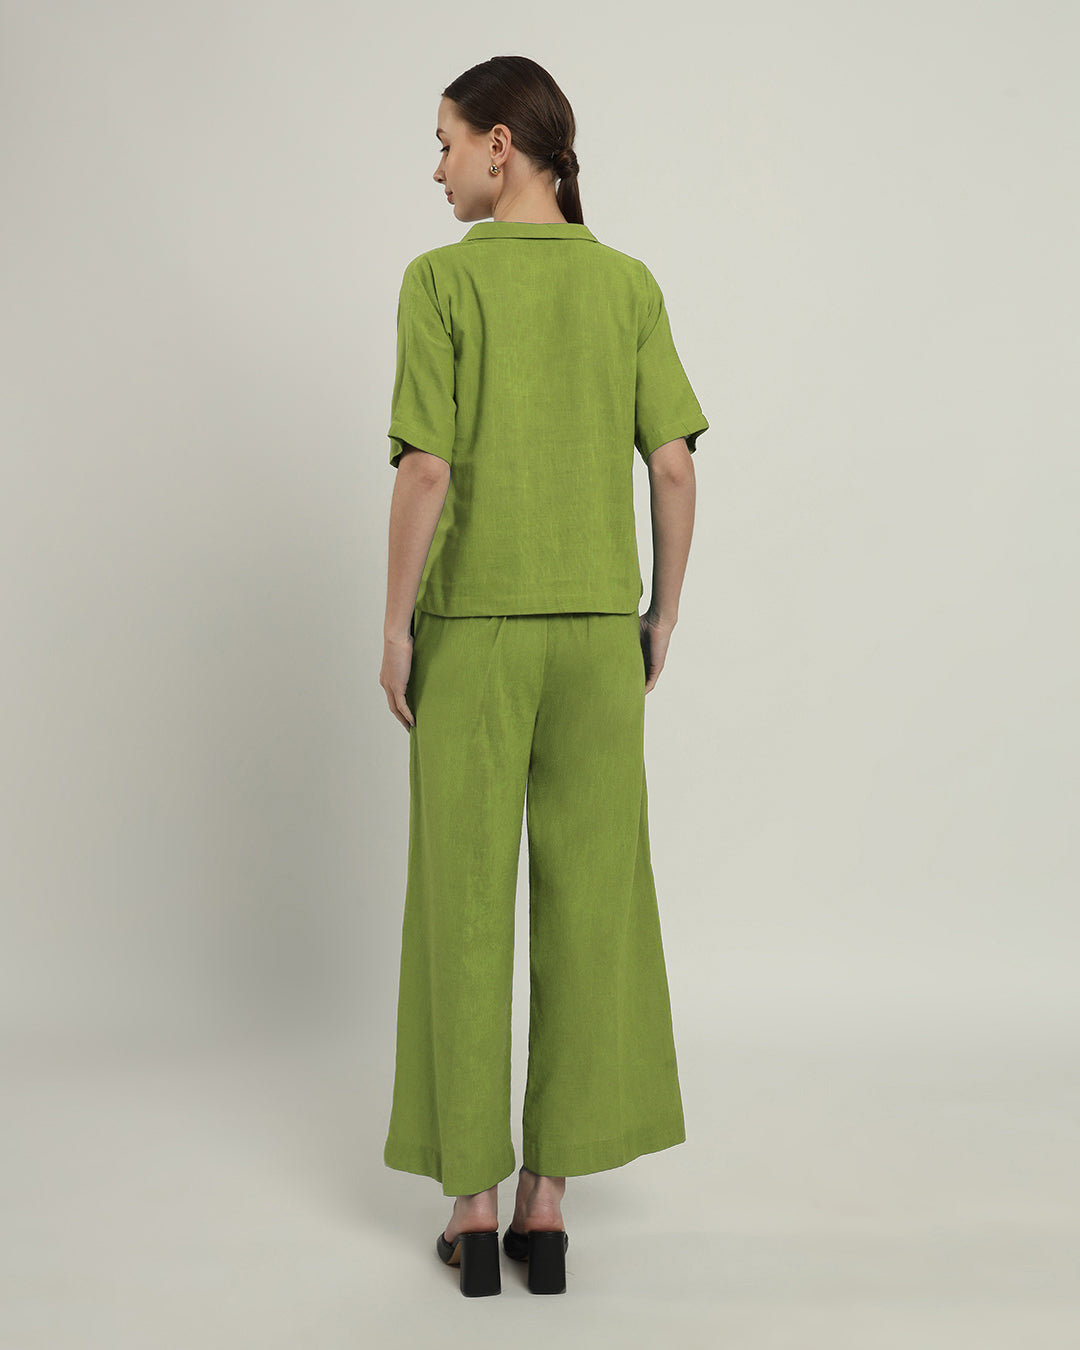 Fern Feeling Easy Collar Neck Top (Without Bottoms)